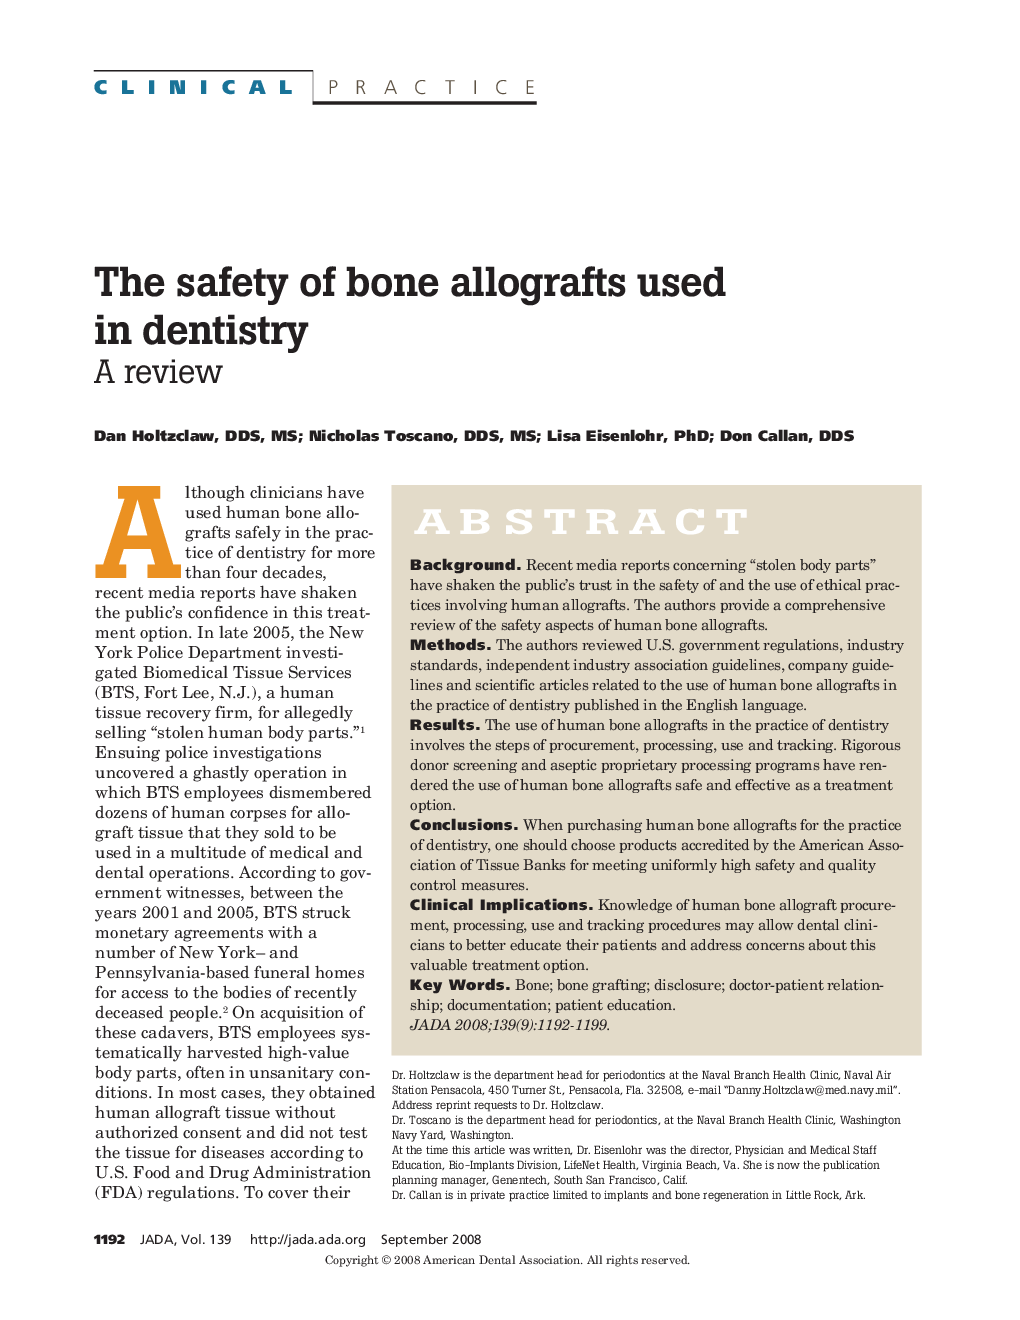 The Safety of Bone Allografts Used in Dentistry : A Review